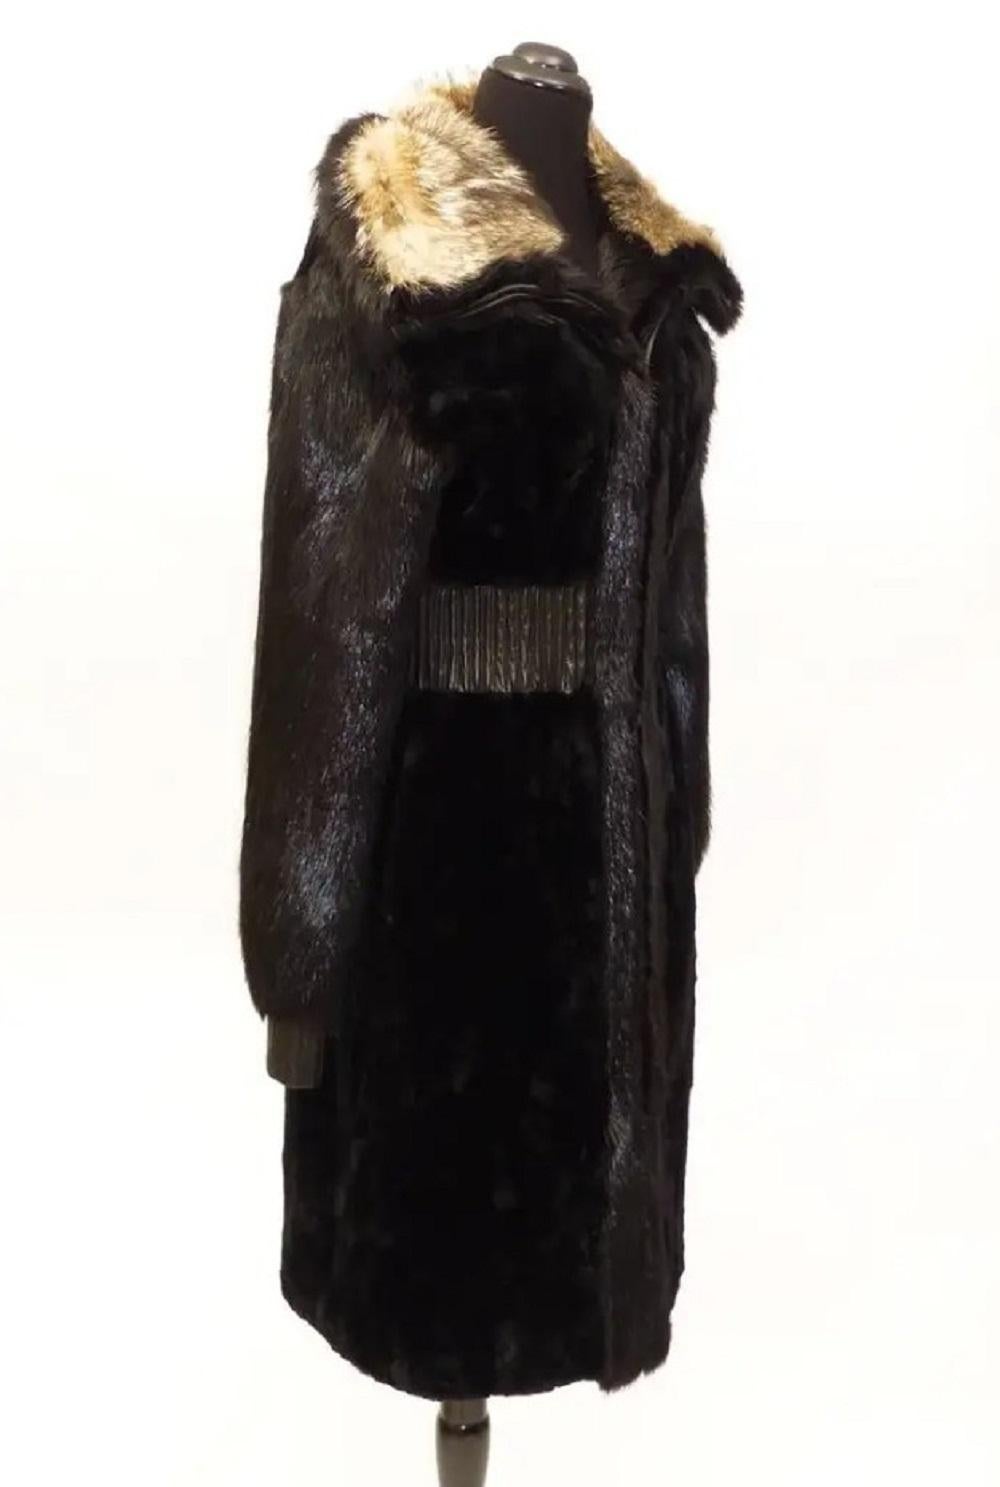 NWT Tom Ford for Yves Saint Laurent F/W 2003 Fur Coat French 38 - US 6 Neuf - En vente à Montgomery, TX